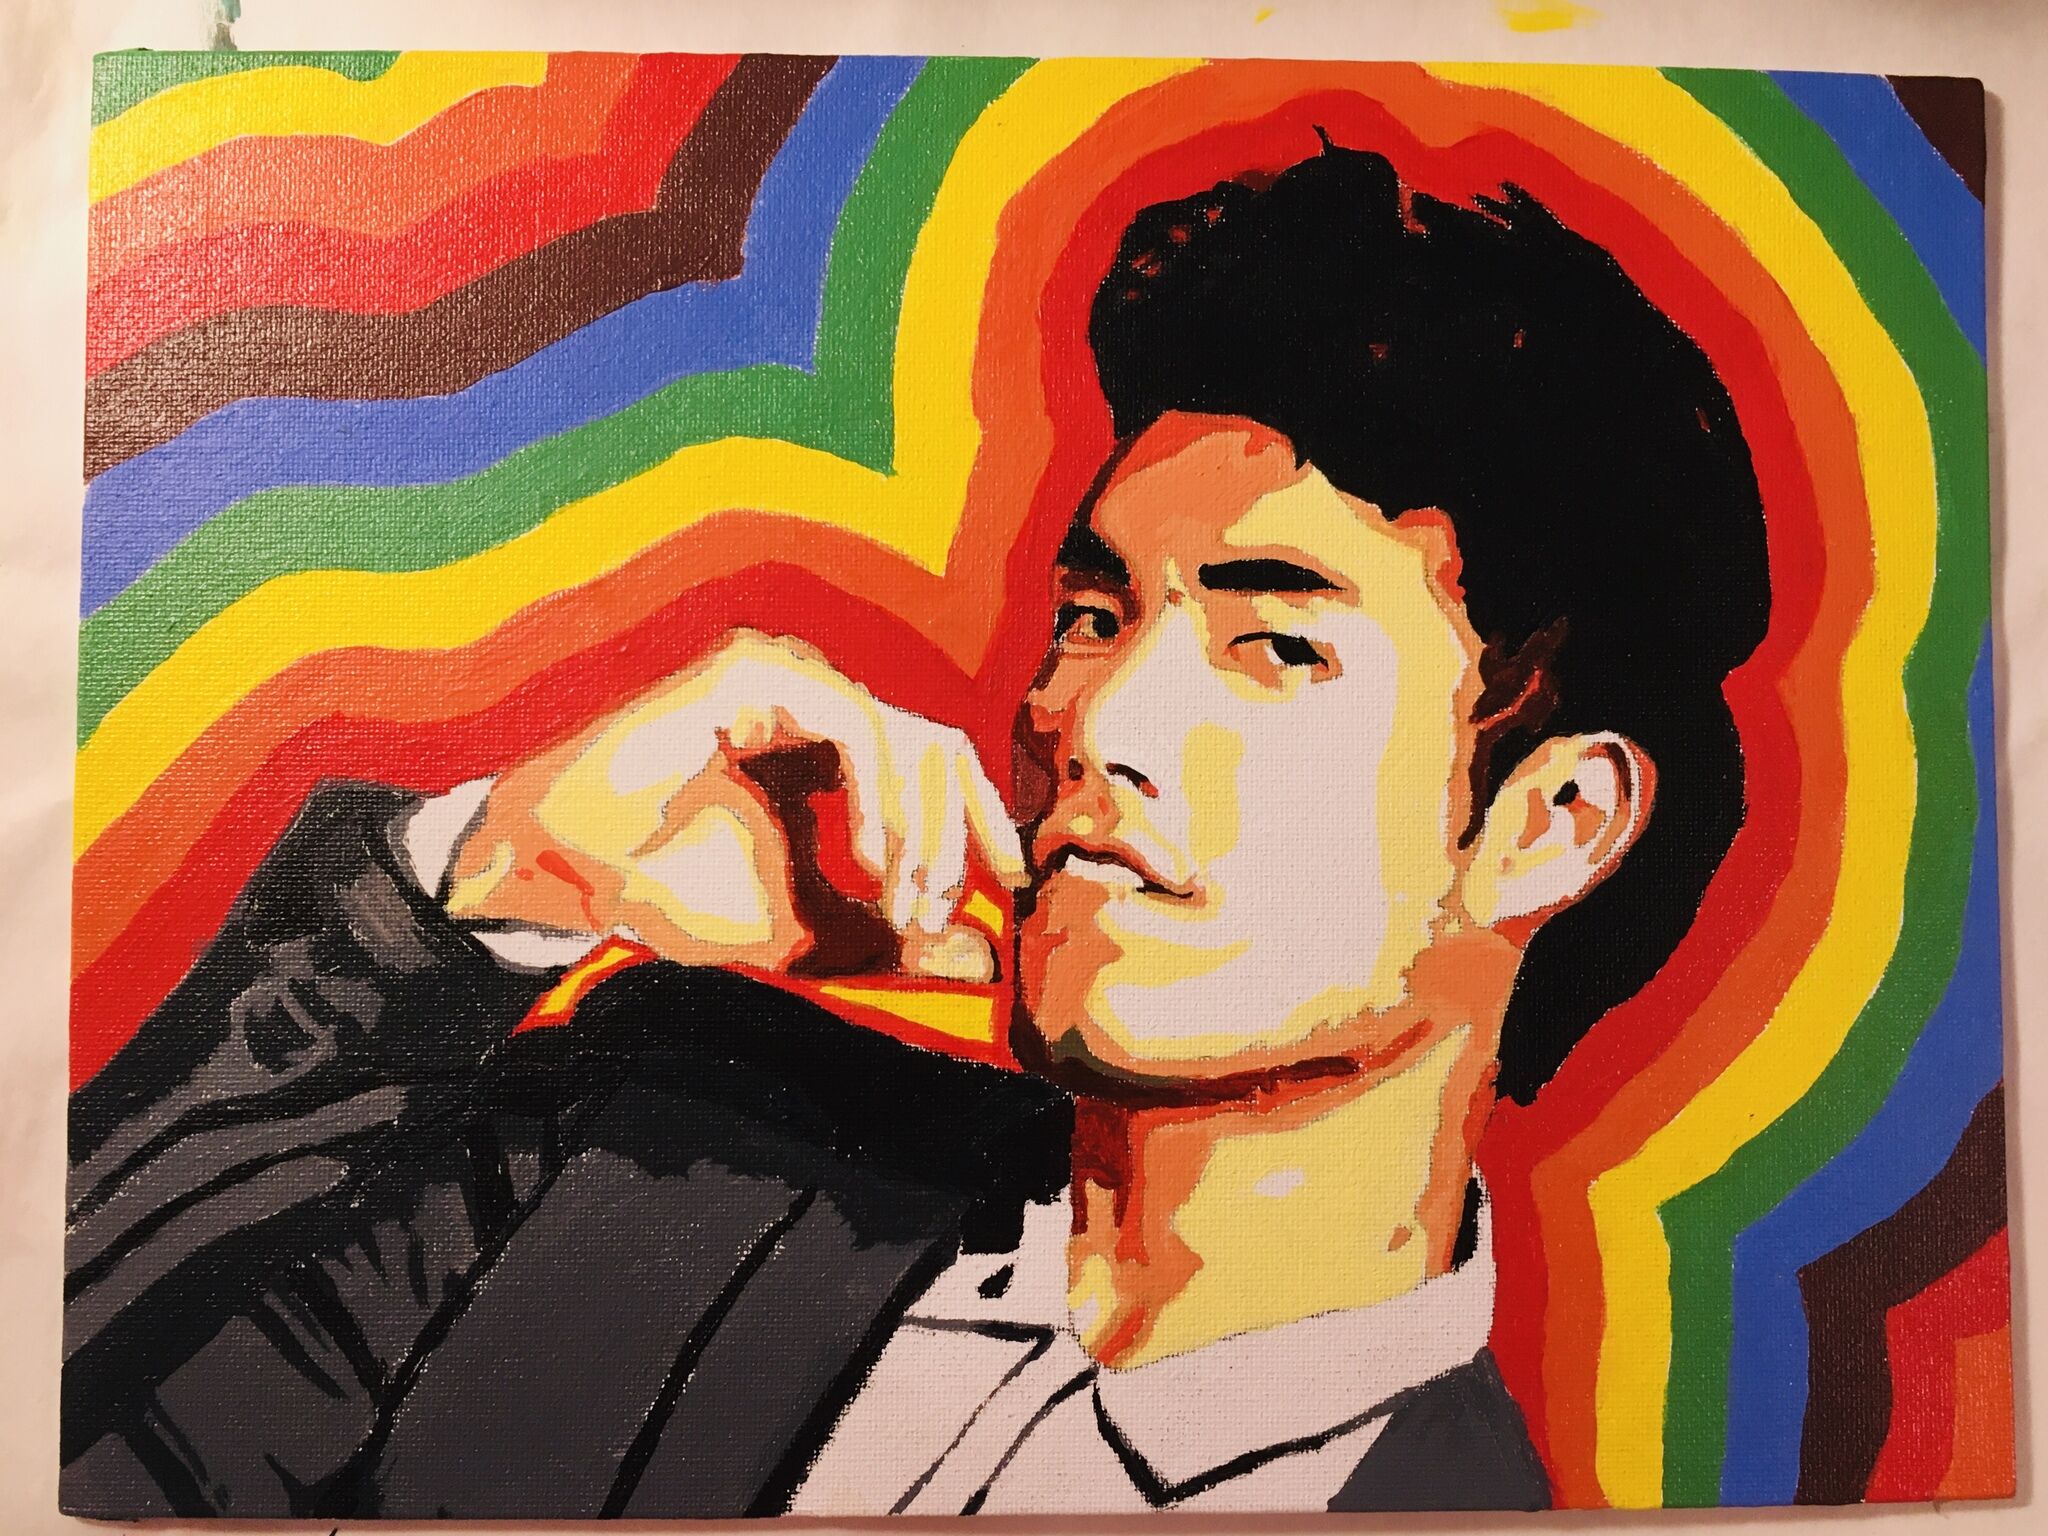 A portrait of Eugene Lee Yang encompassed by an alternating rainbow outline. 